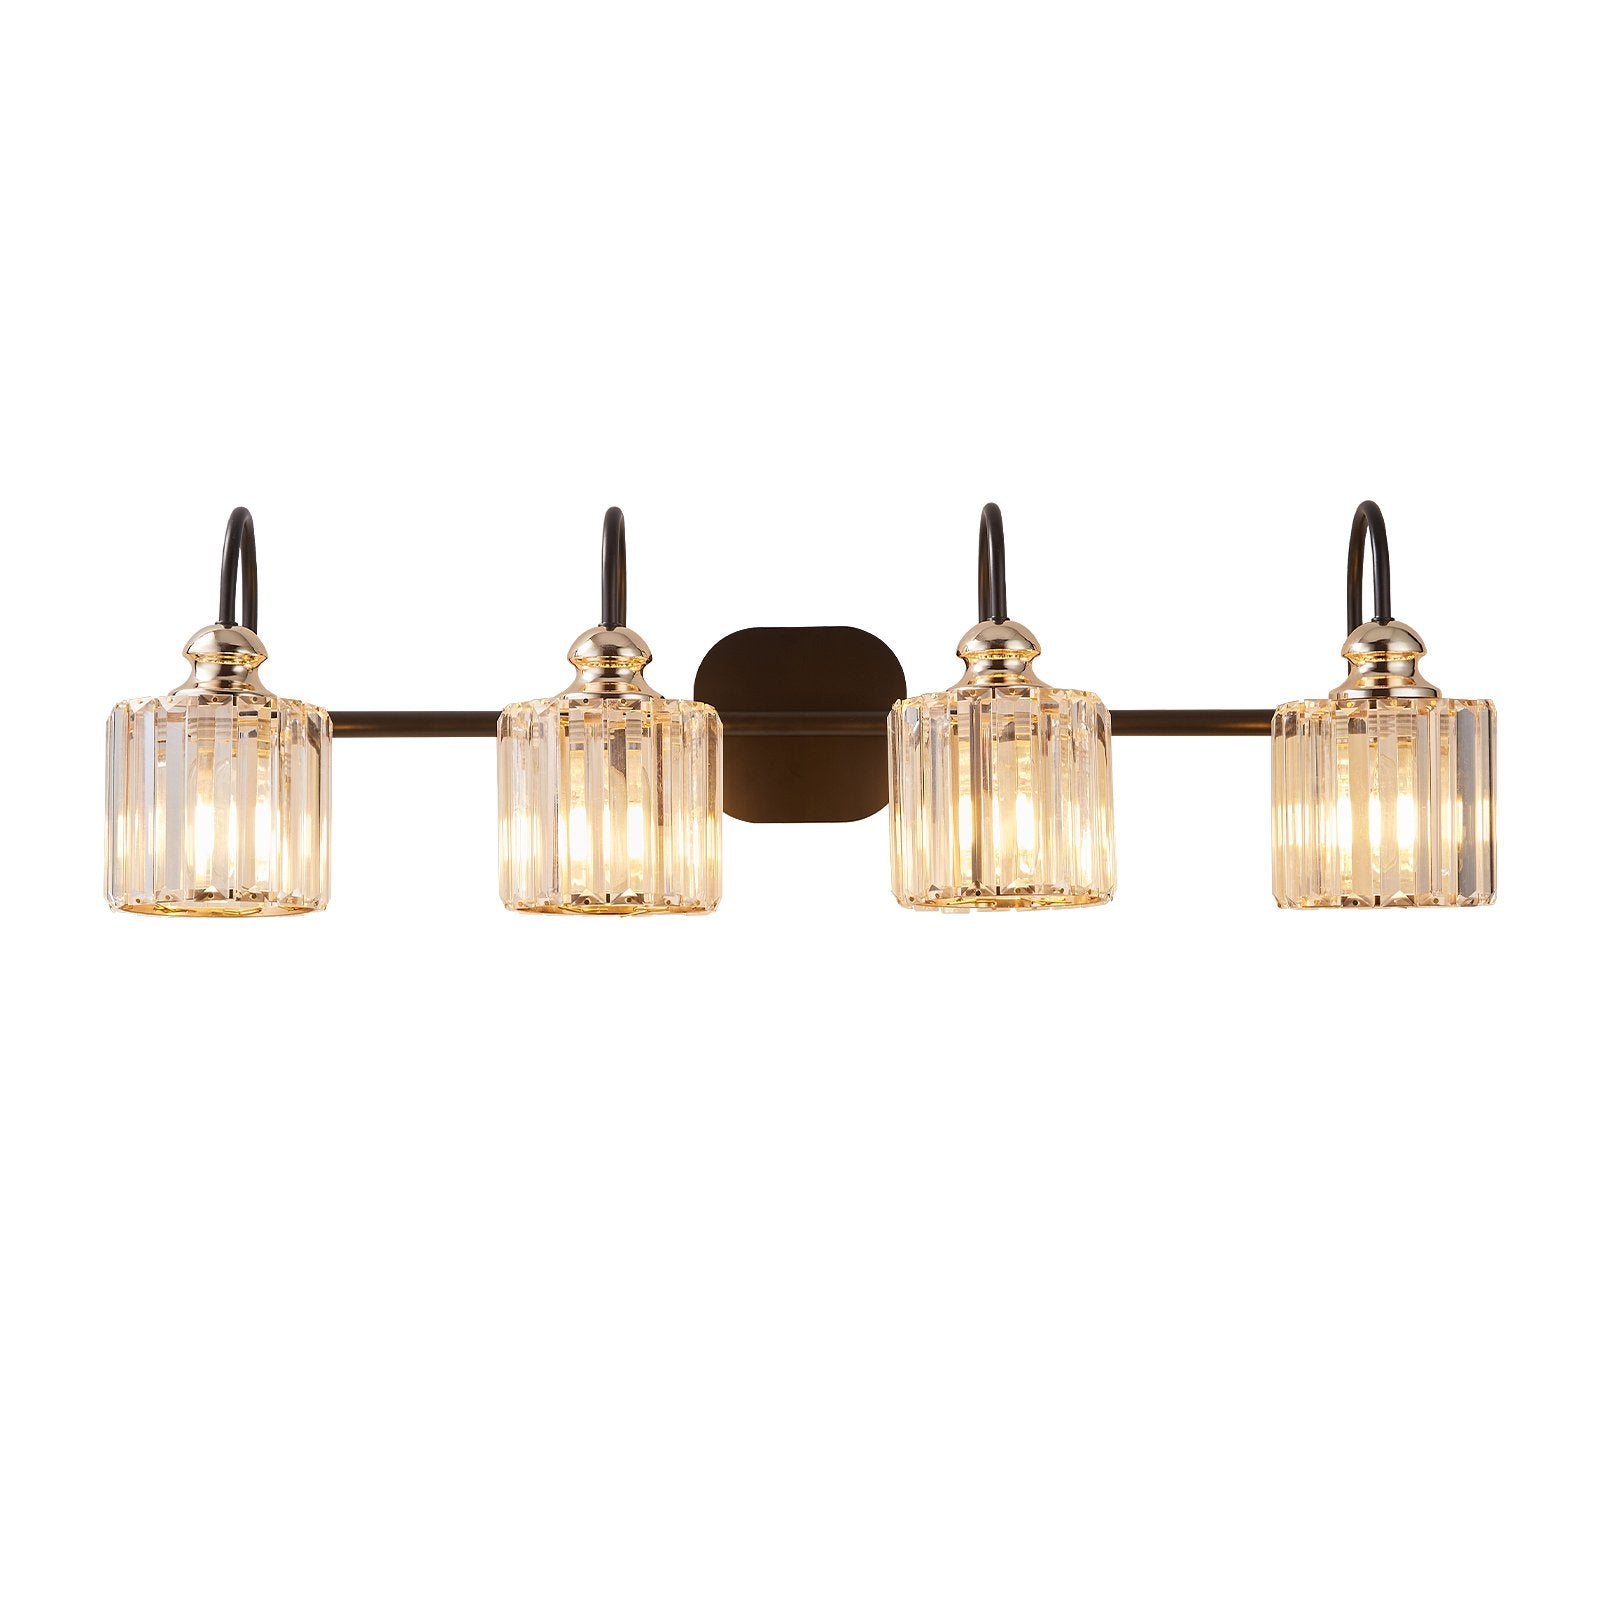 Modern Vanity Lights Wall Sconce 4 Heads Brushed Nickel Bathroom Lighting Fixtures Over Mirror with Clear Glass Shade